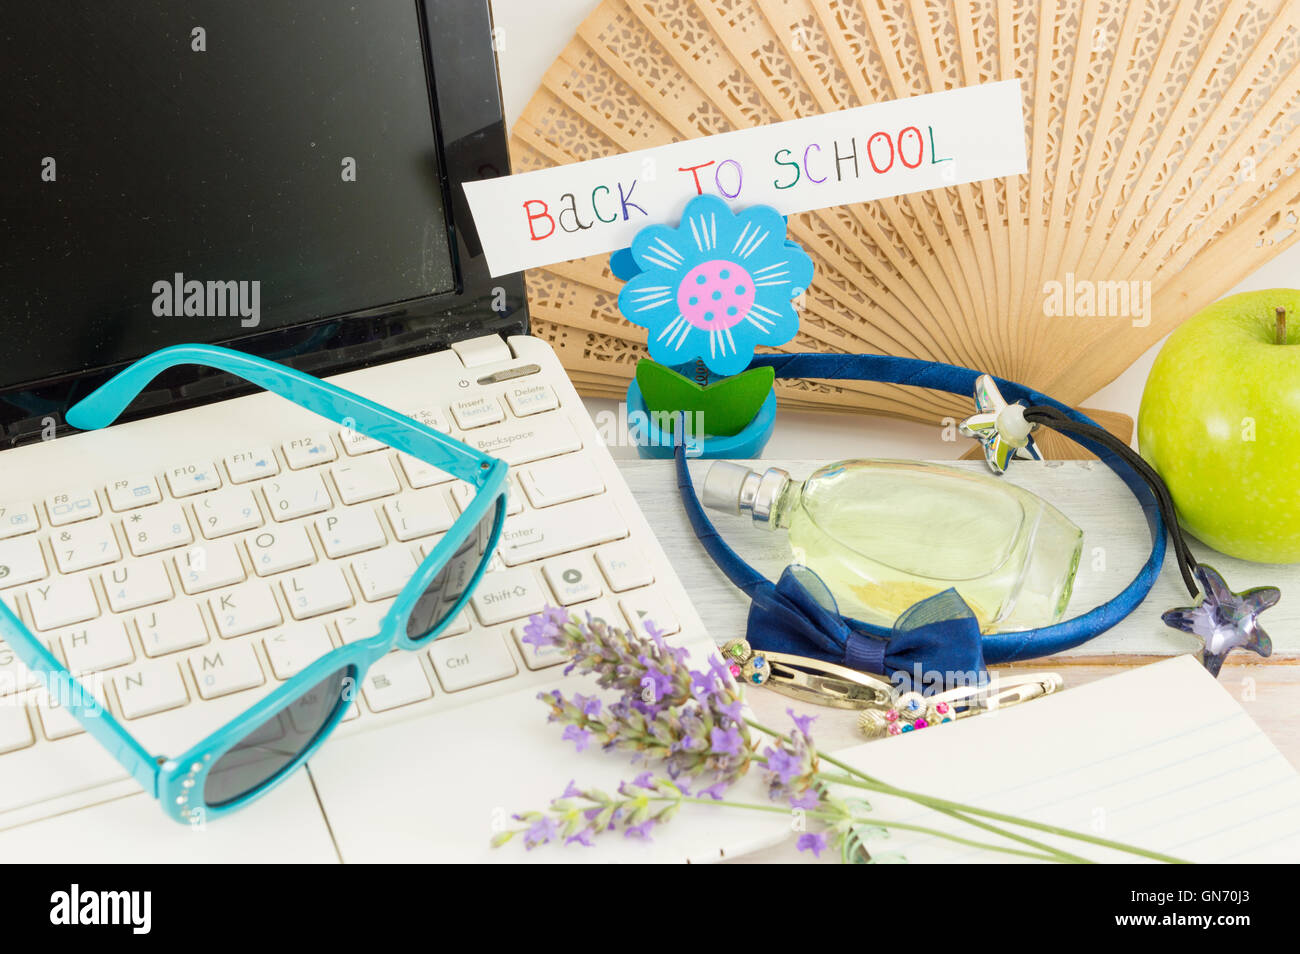 Back to school, laptop and bunch of girl accessories Stock Photo